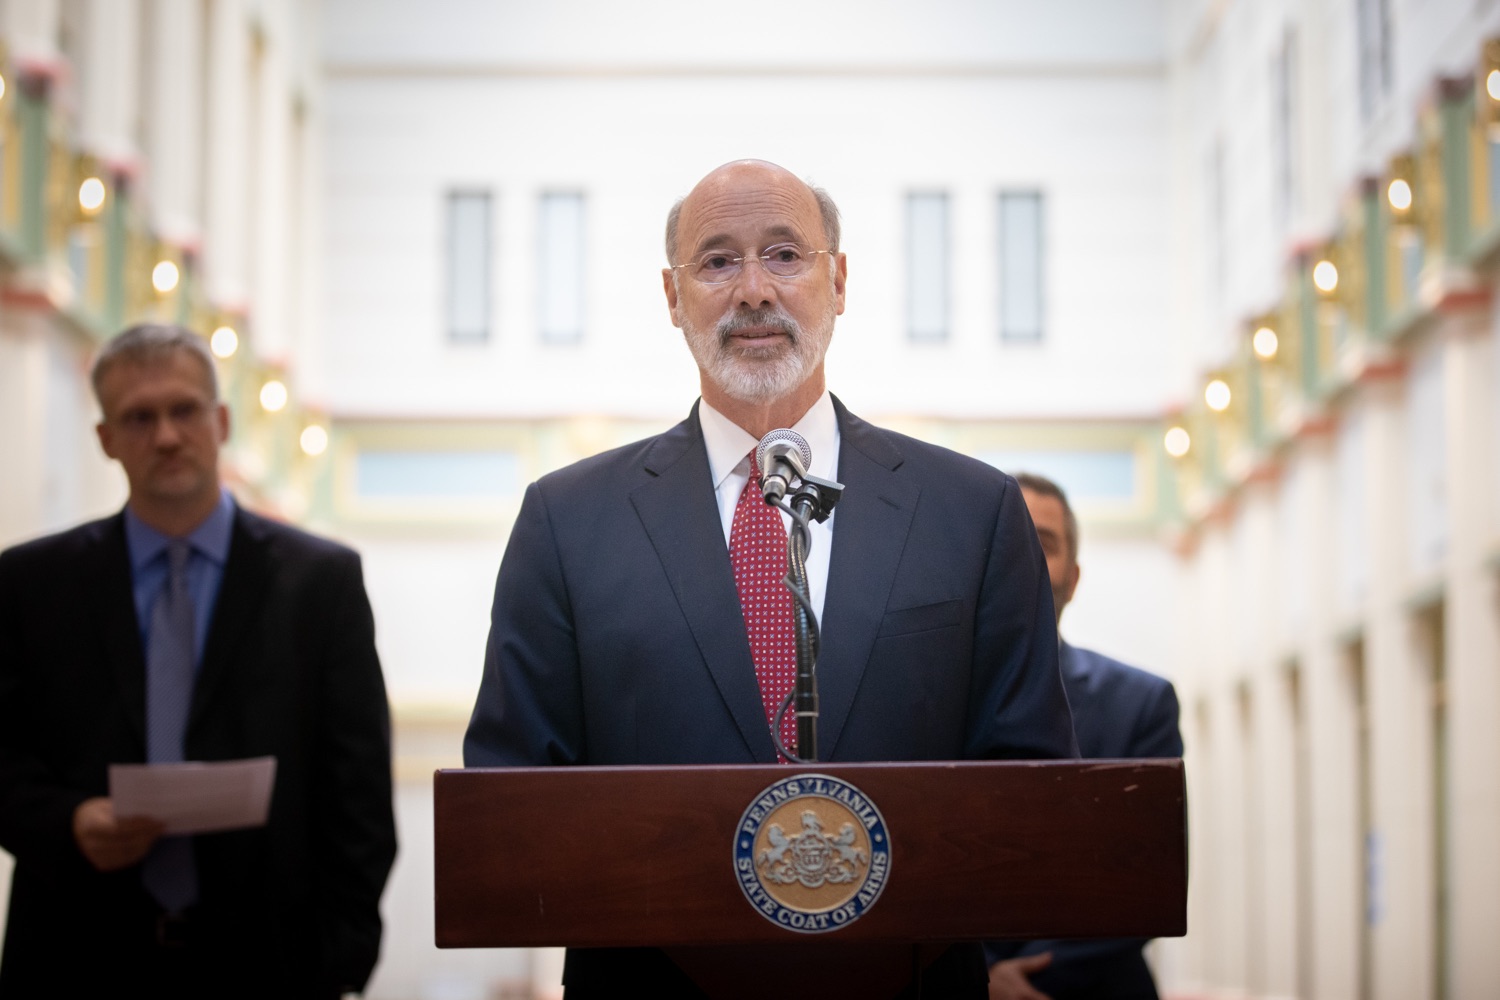 Pennsylvania Governor Tom Wolf speaks at the robotics demonstration.   Celebrating the success of the PAsmart workforce development program to create educational opportunities at schools across the commonwealth, Governor Tom Wolf welcomed more than 50 students from the Pennsylvania Rural Robotics Initiative to the Capitol today. The students from nine western Pennsylvania school districts showcased their skills in coding, robotics and drone technology. The Wolf administration awarded the initiative a $299,000 PAsmart Advancing Grant earlier this year. Harrisburg, PA  Tuesday, November 12, 2019<br><a href="https://filesource.amperwave.net/commonwealthofpa/photo/17587_gov_pasmart_rural_robotics_dz_015.jpg" target="_blank">⇣ Download Photo</a>